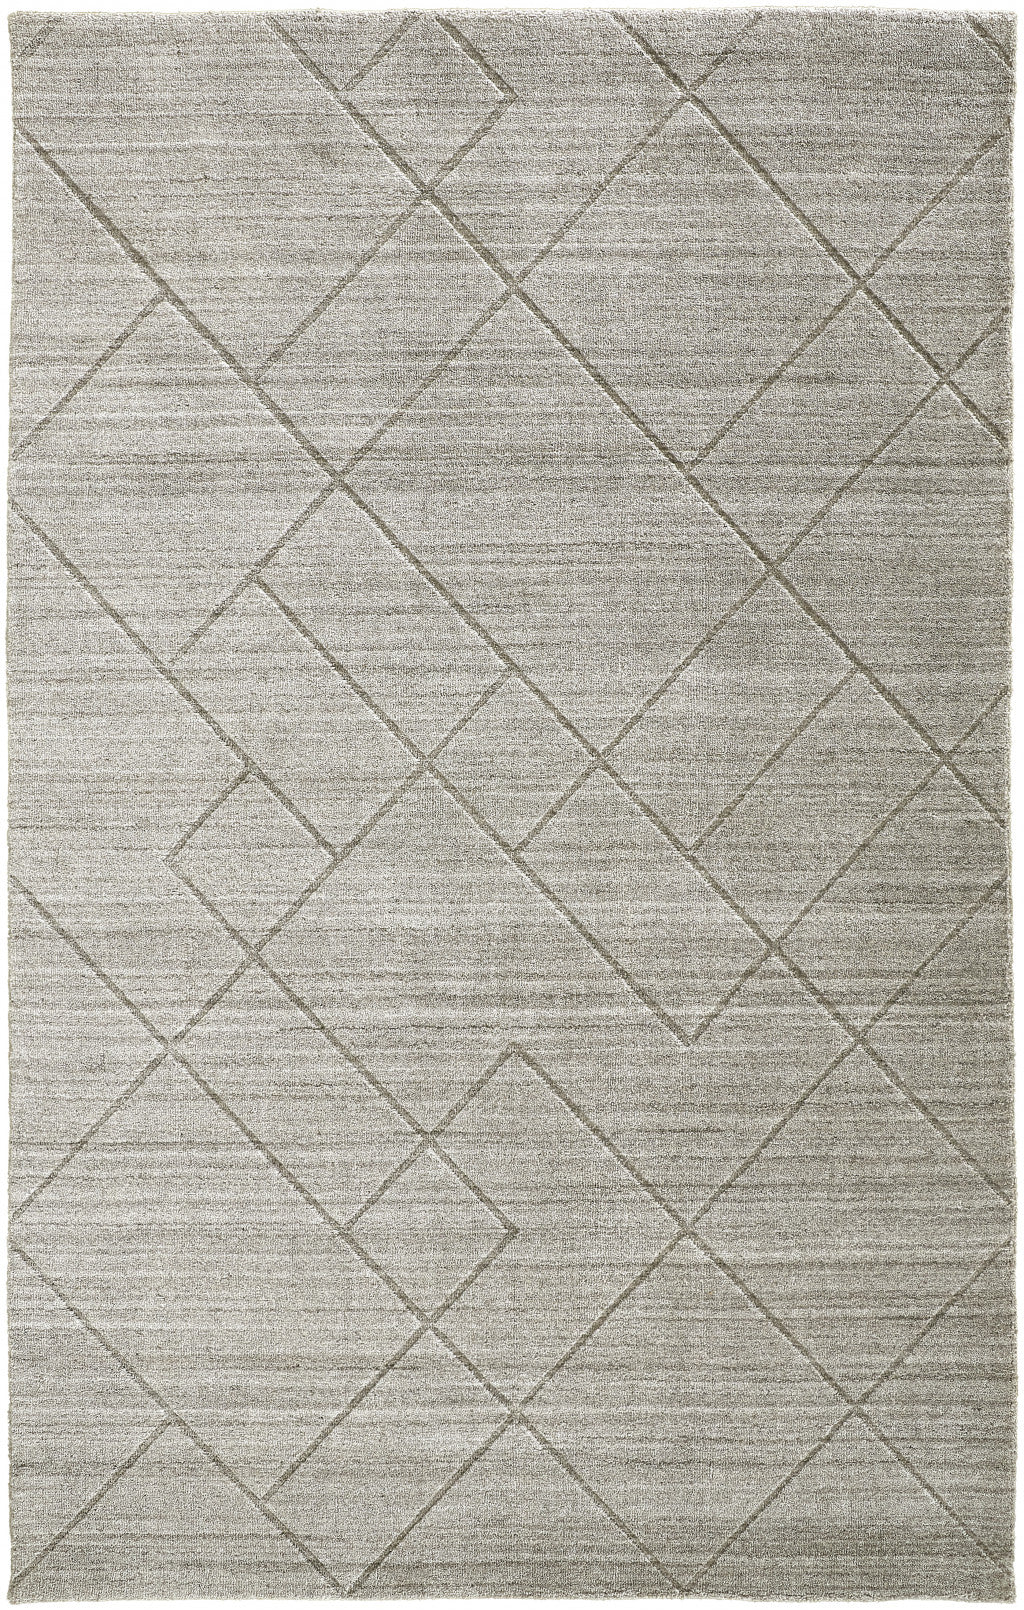 4' X 6' Ivory And Silver Striped Hand Woven Area Rug